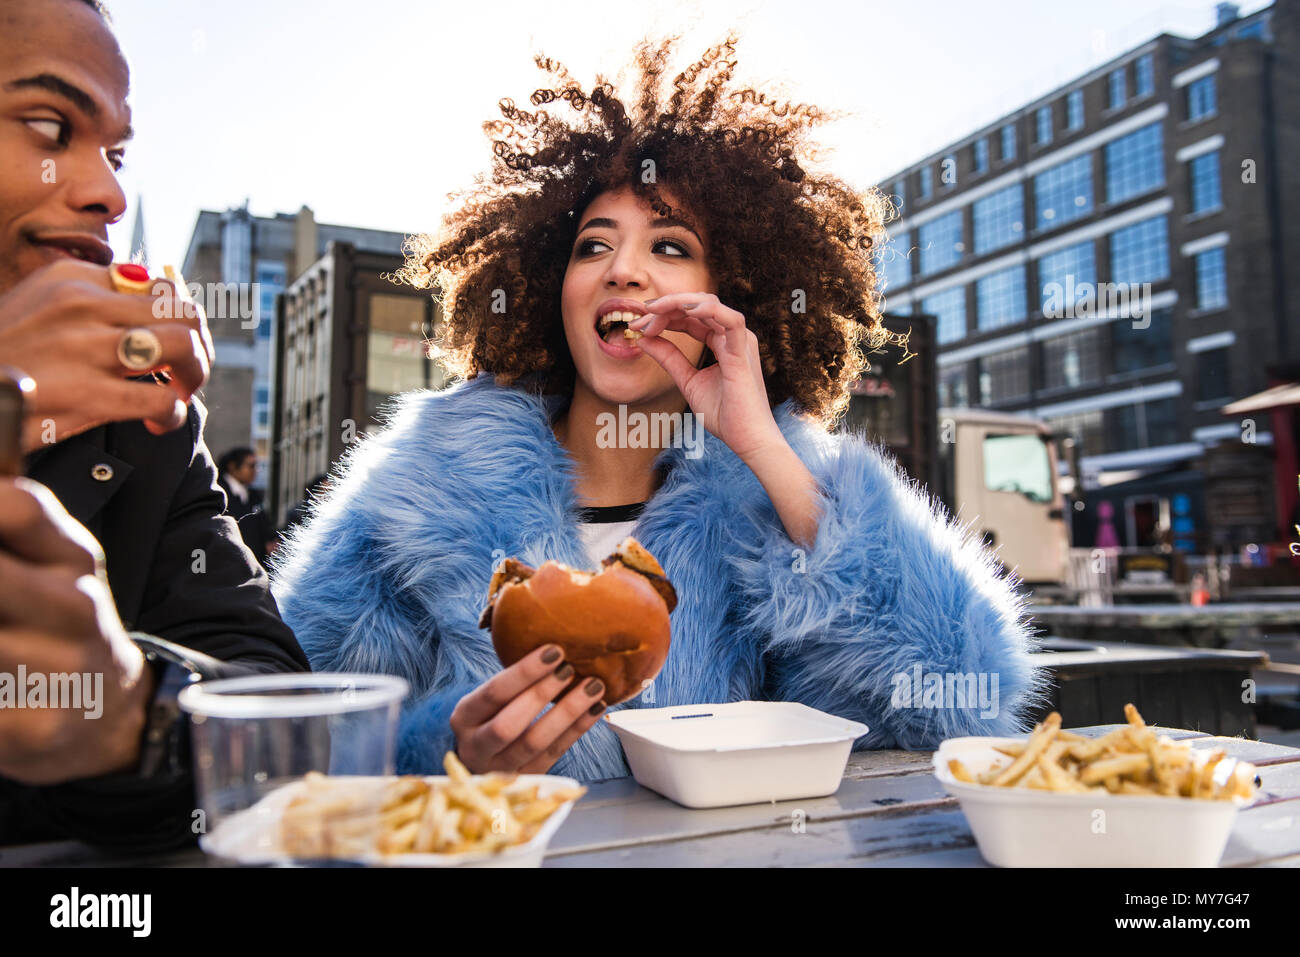 Young couple eating burger and chips outdoors Stock Photo